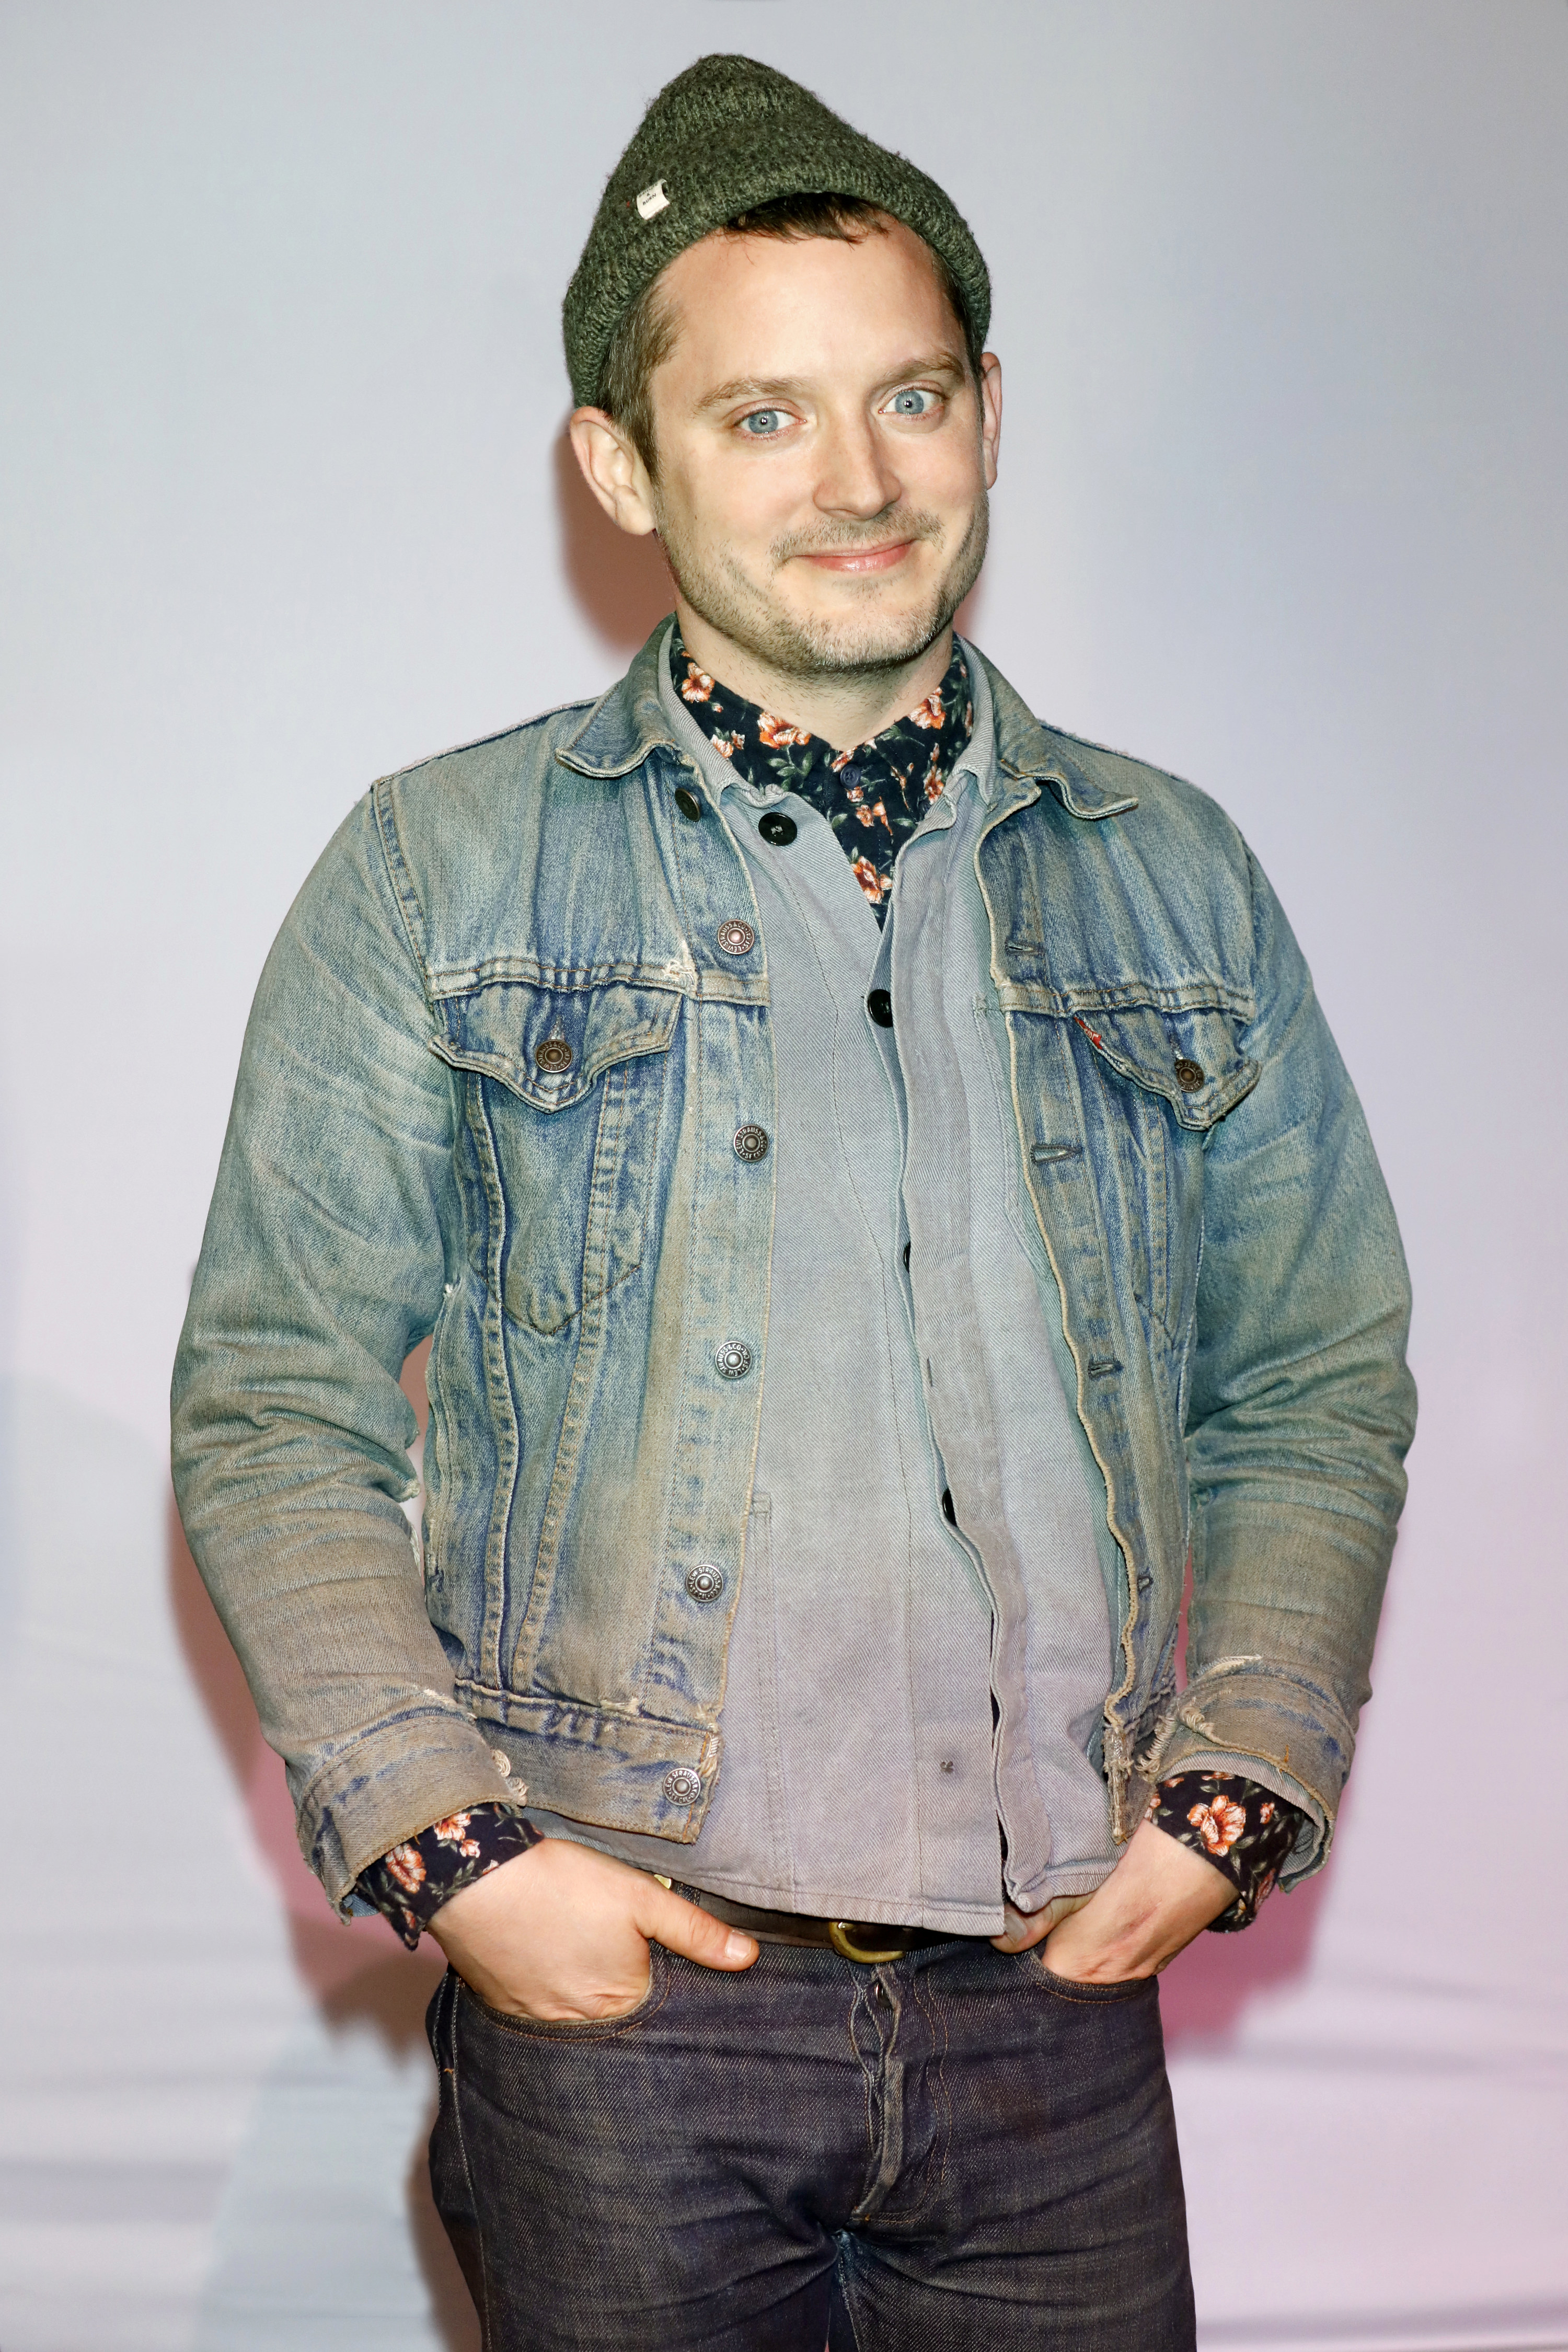 Wearing a denim jacket and jeans and hands in jeans pockets